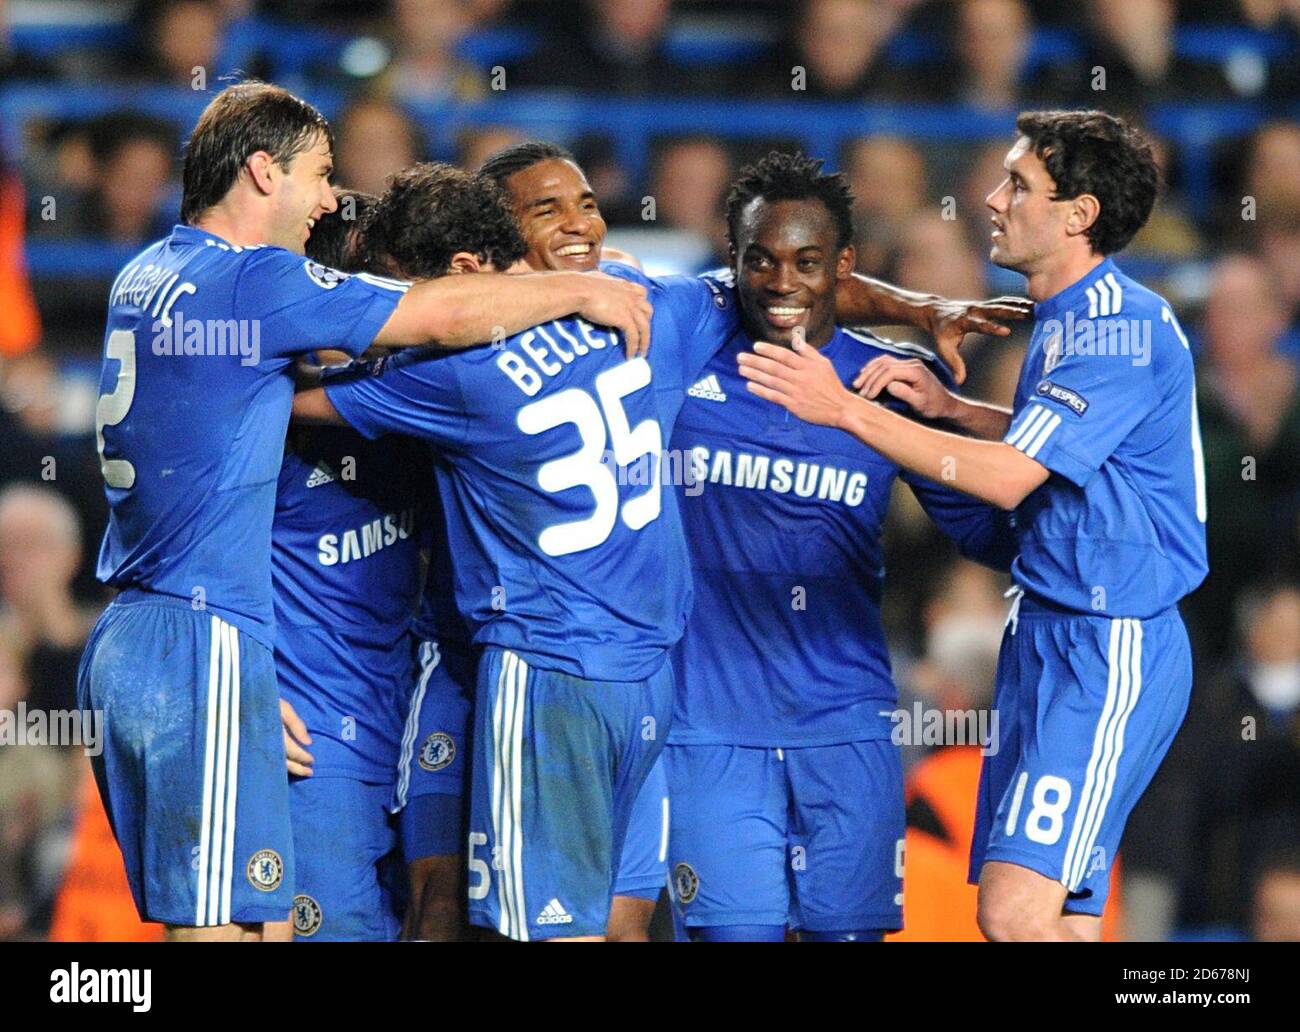 Chelsea celebrate after Atletico Madrid's Luis Amaranto Perea heads in an own goal Stock Photo